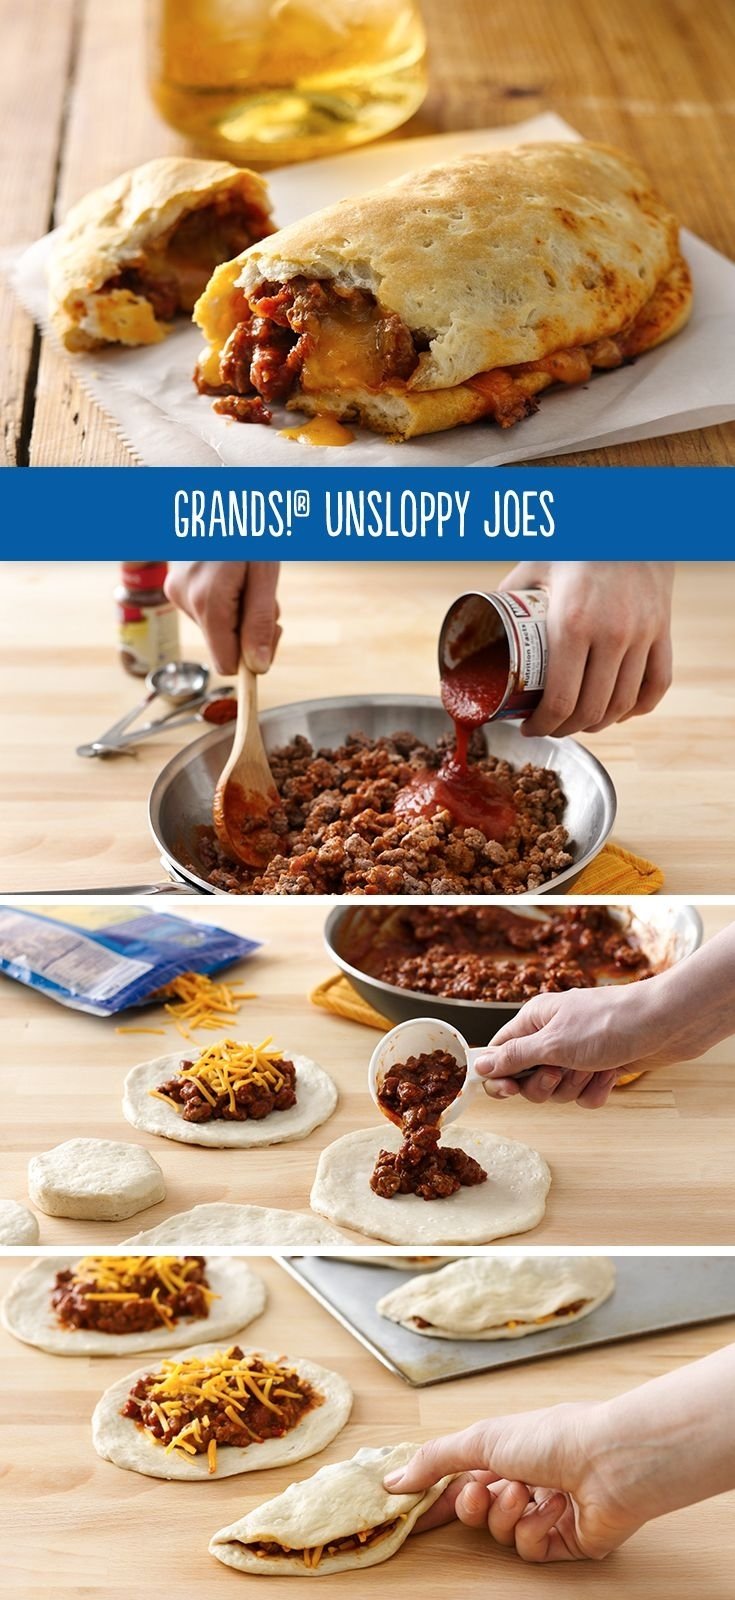 10 Most Recommended Take Out Ideas For Dinner grands unsloppy joes recipe dinners easy and food 2022